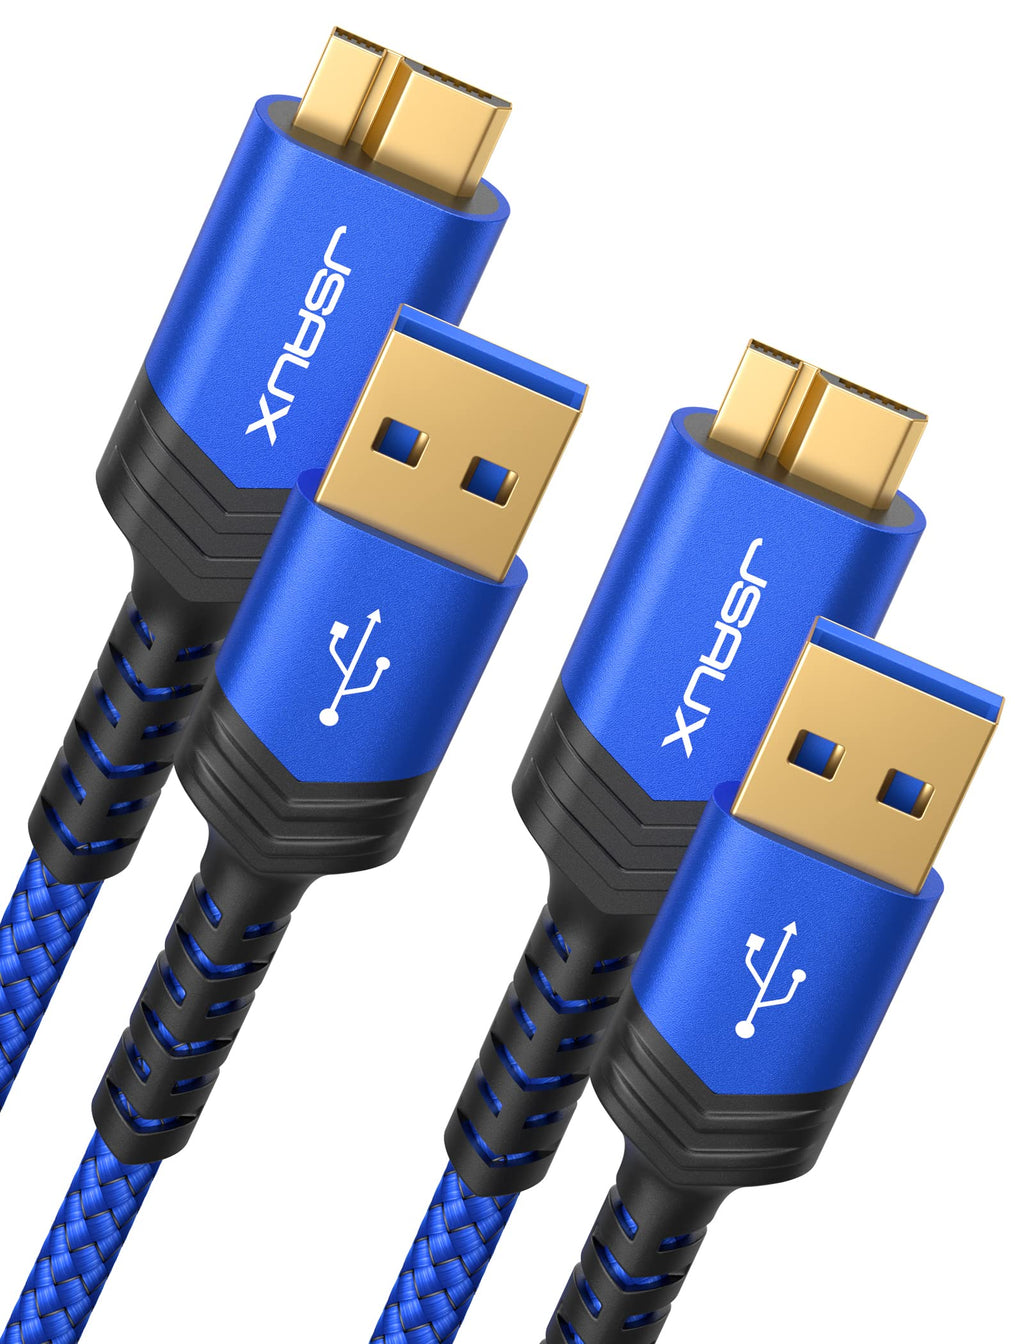  [AUSTRALIA] - JSAUX USB 3.0 Micro Cable, External Hard Drive Cable 2 Pack (1ft+3.3ft) USB A Male to Micro B Charger Cord Compatible with Toshiba, WD, Seagate Hard Drive, Samsung Galaxy S5, Note 3, Note Pro 12.2 ect blue